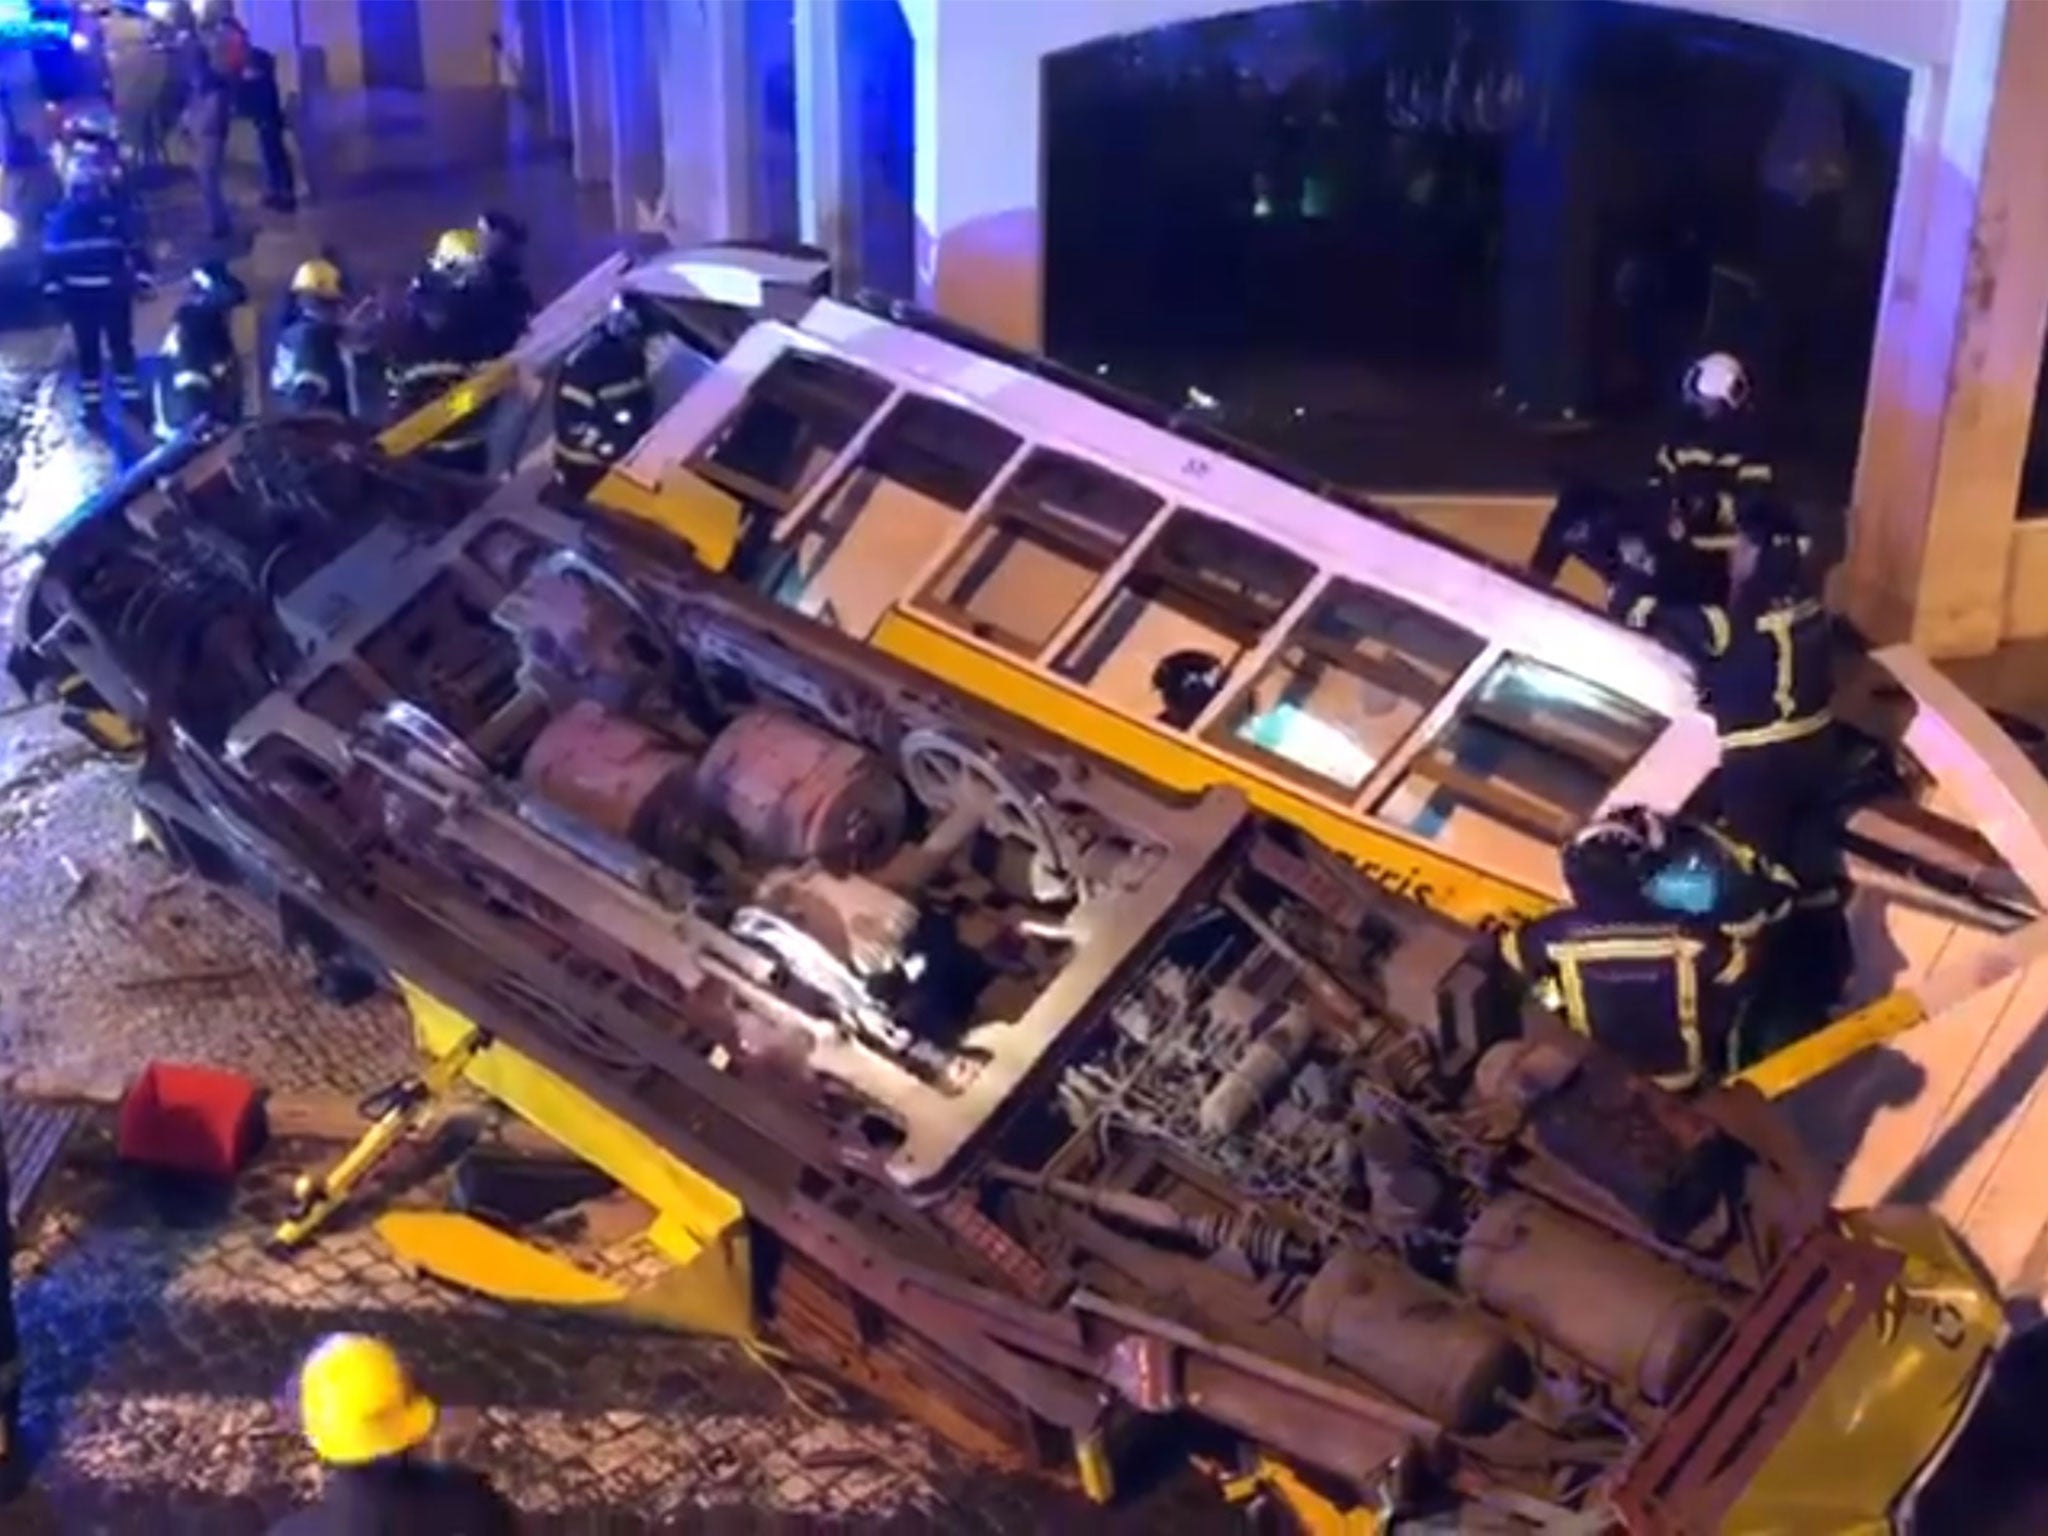 Witnesses saw people a baby and child to safety from the wreckage of the tram